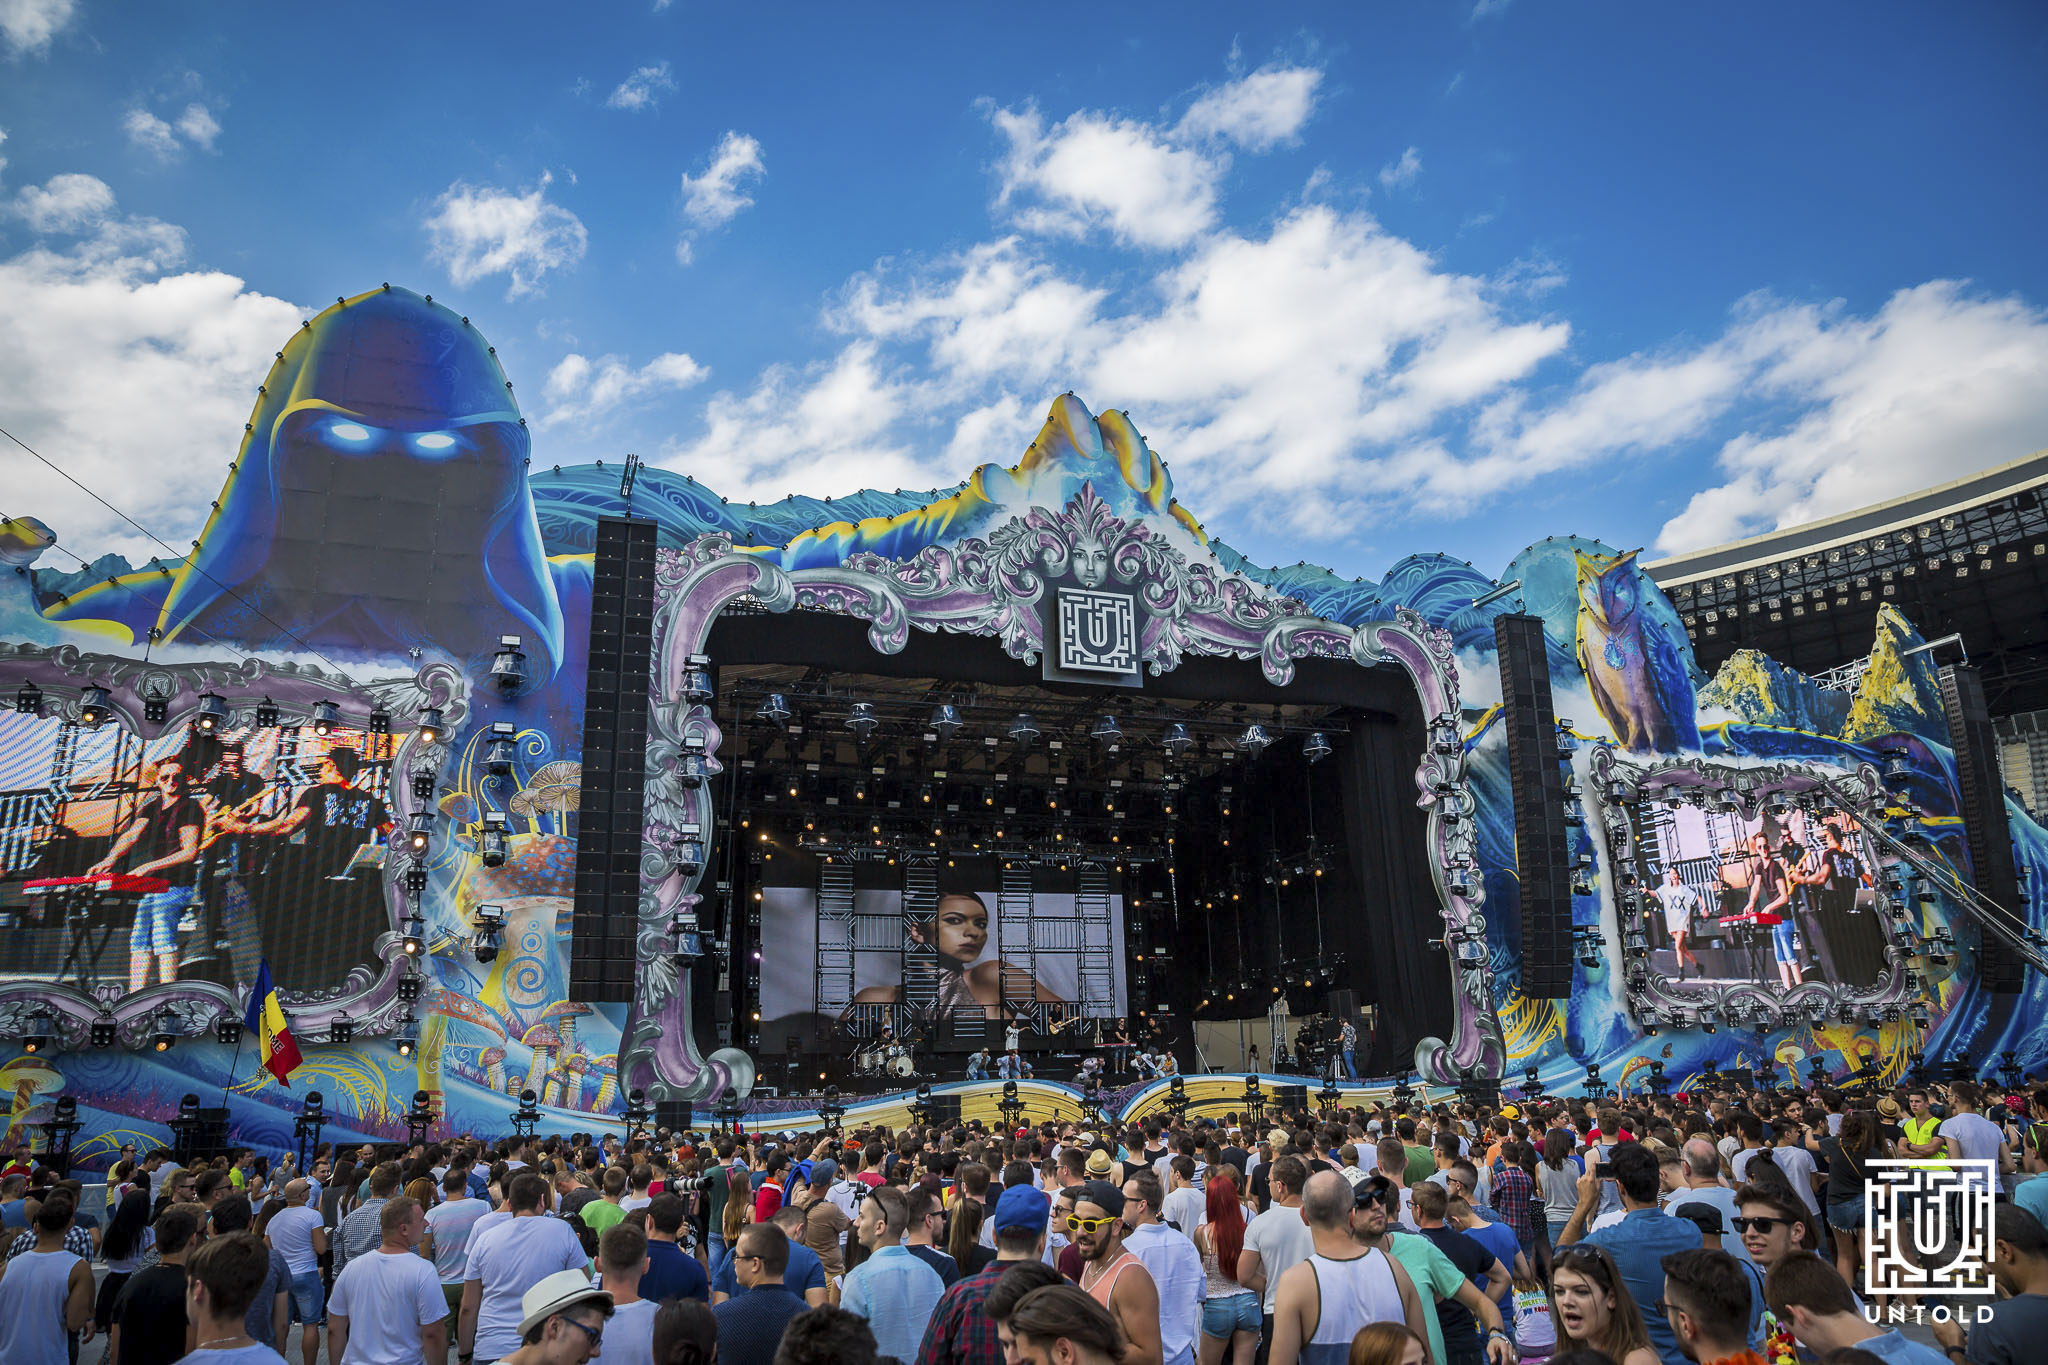 untold main stage during daylight